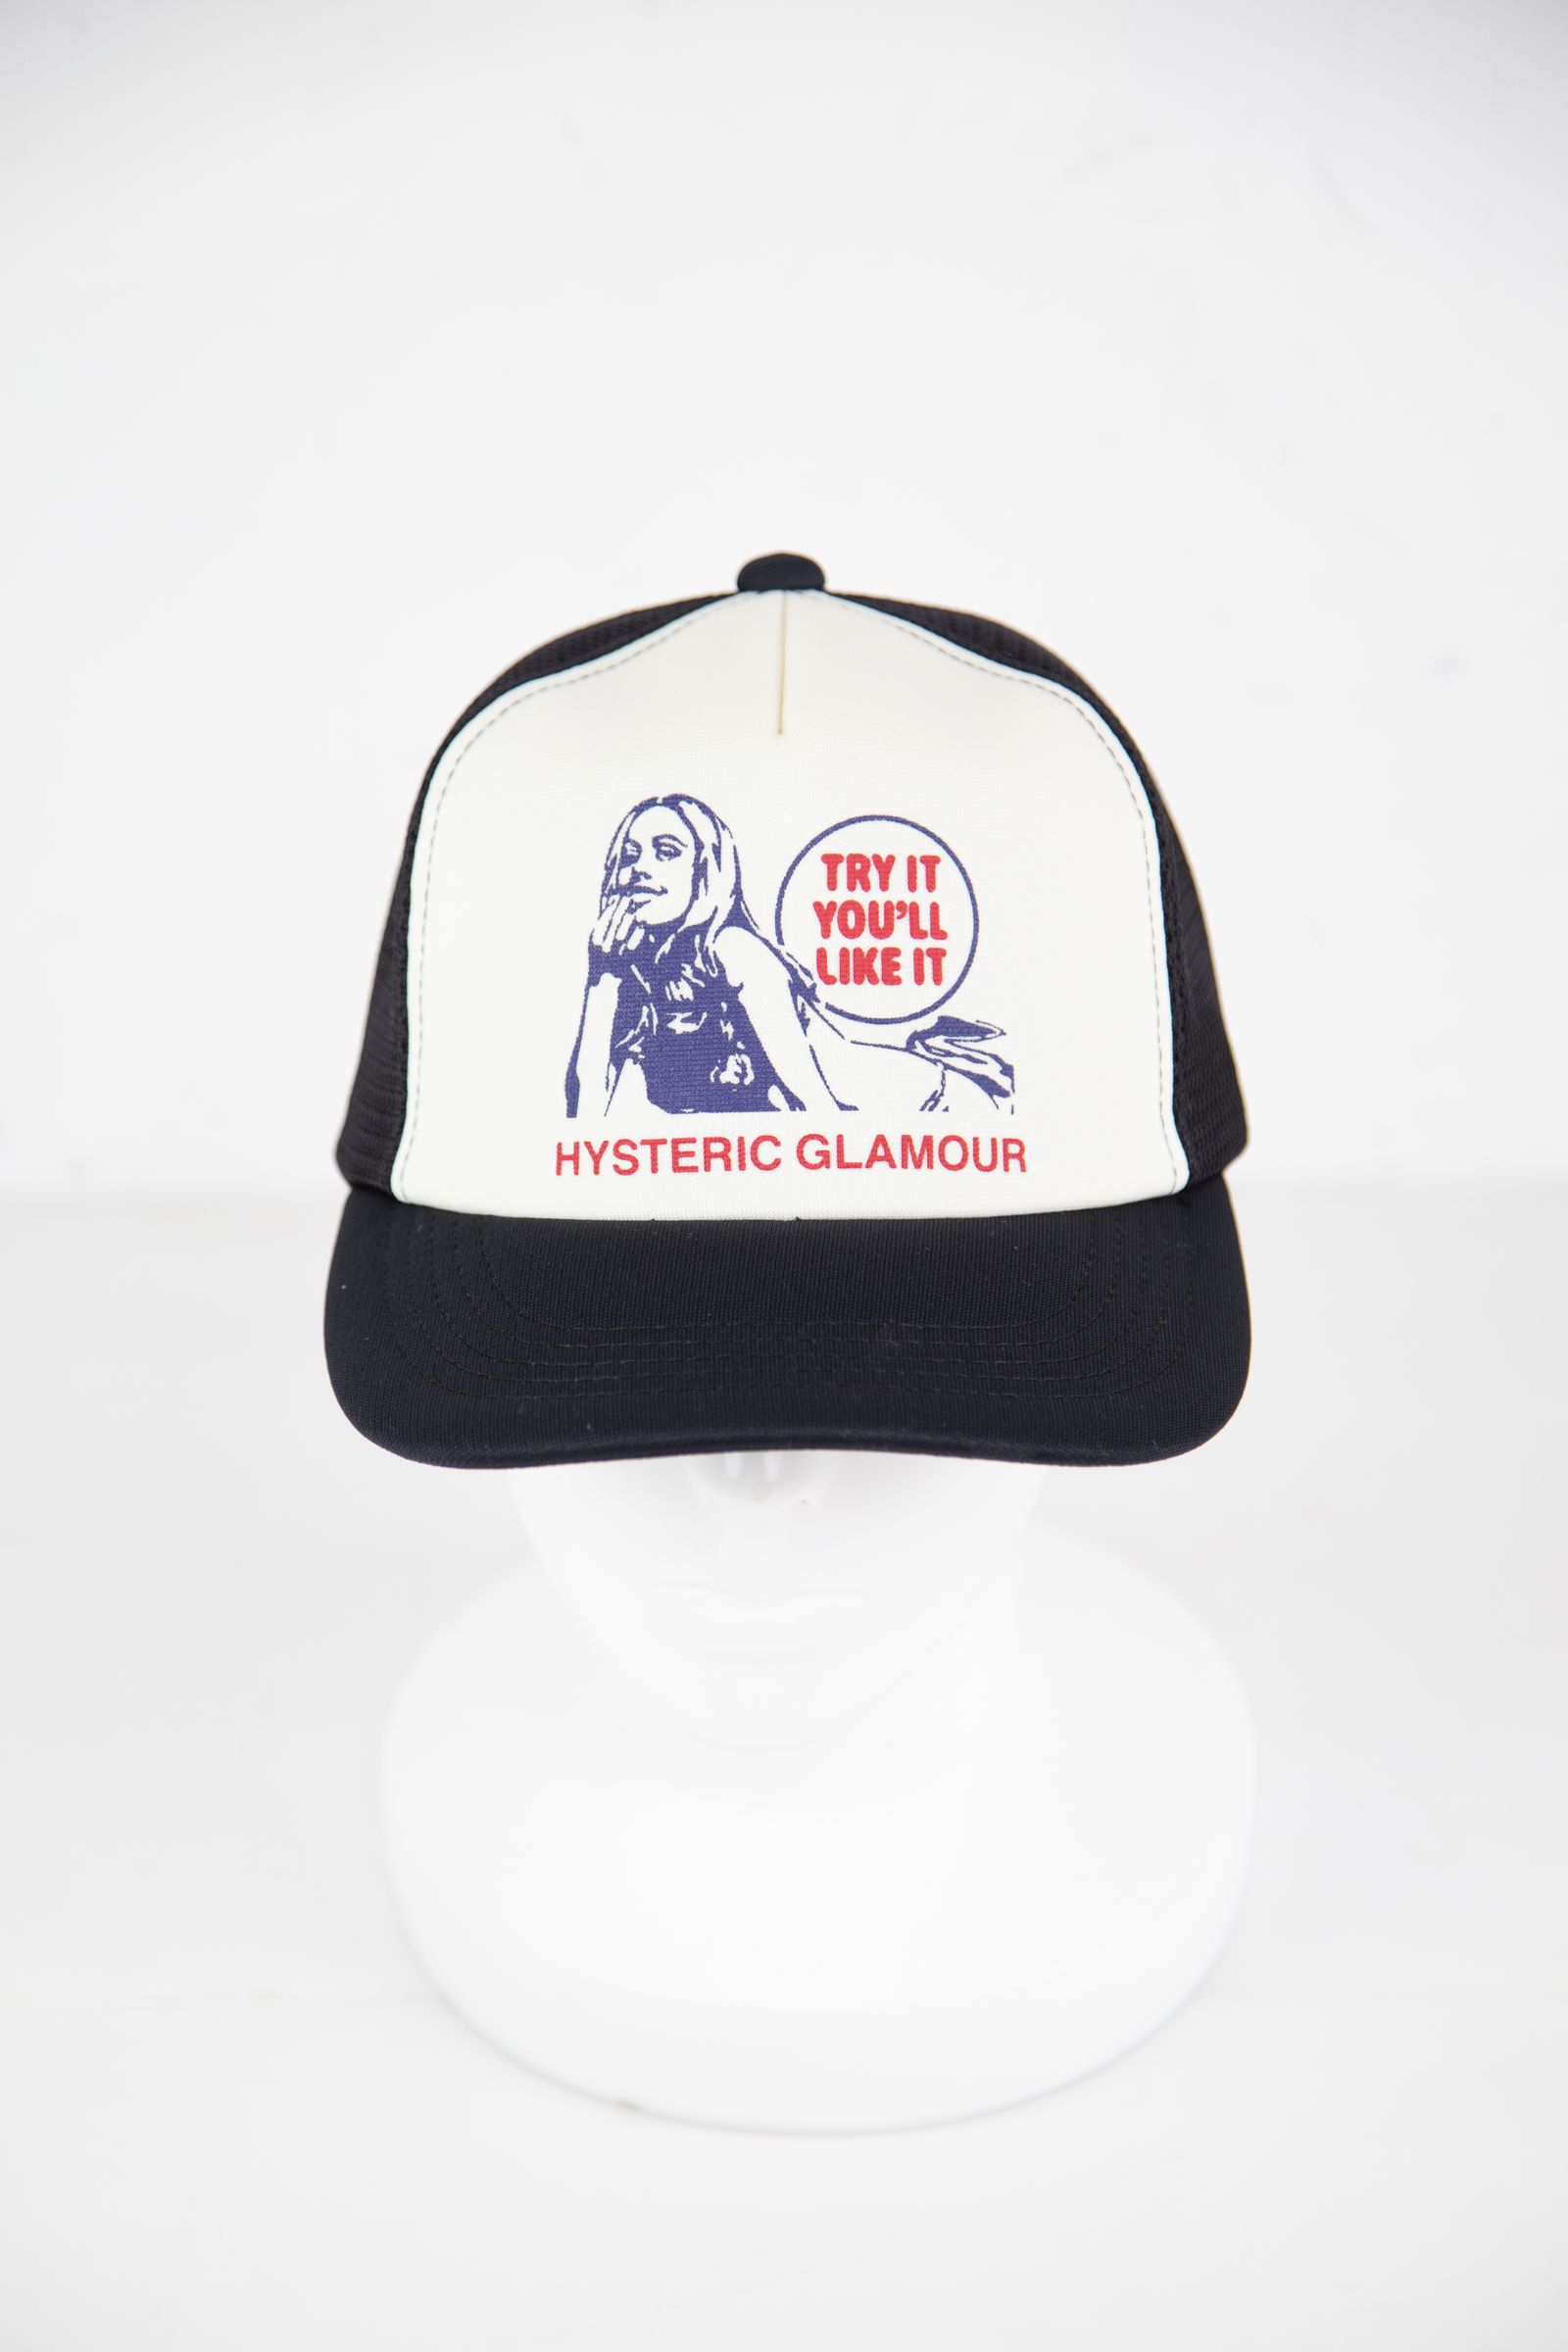 HYSTERIC GLAMOUR - IT YOU'LL LIKE IT メッシュキャップ / ブラック ...